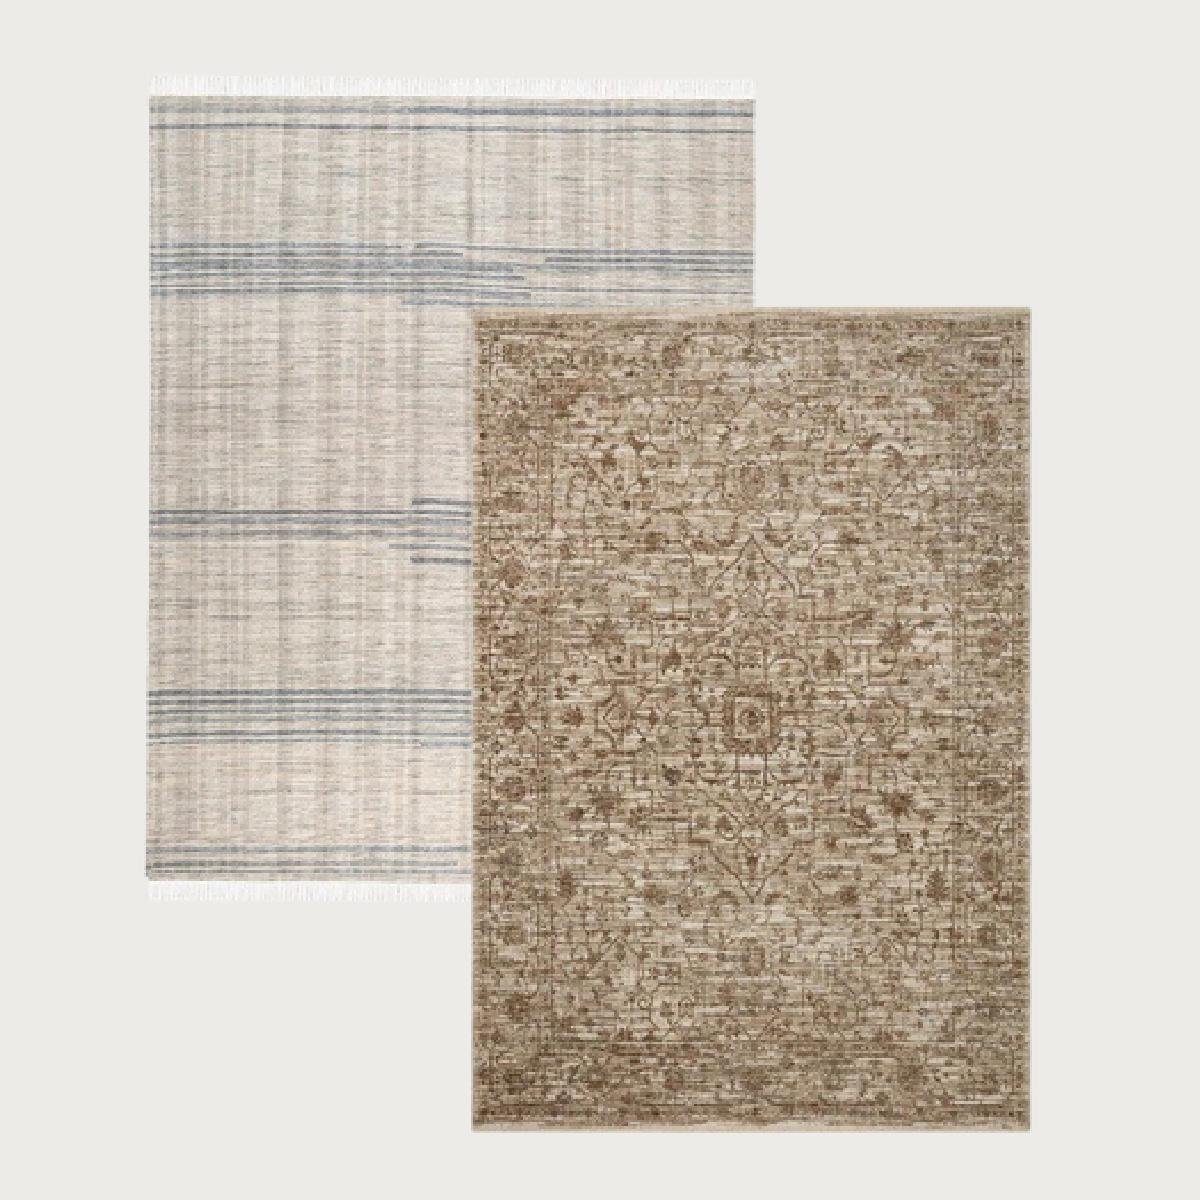 18 rugs that pair well together. How to pick multiple rugs for an open concept space. How to pair rugs that compliment each other. How to mix and match patterned rugs. Rugs that look good together Blue and brown, green and peach rugs | Nadine Stay